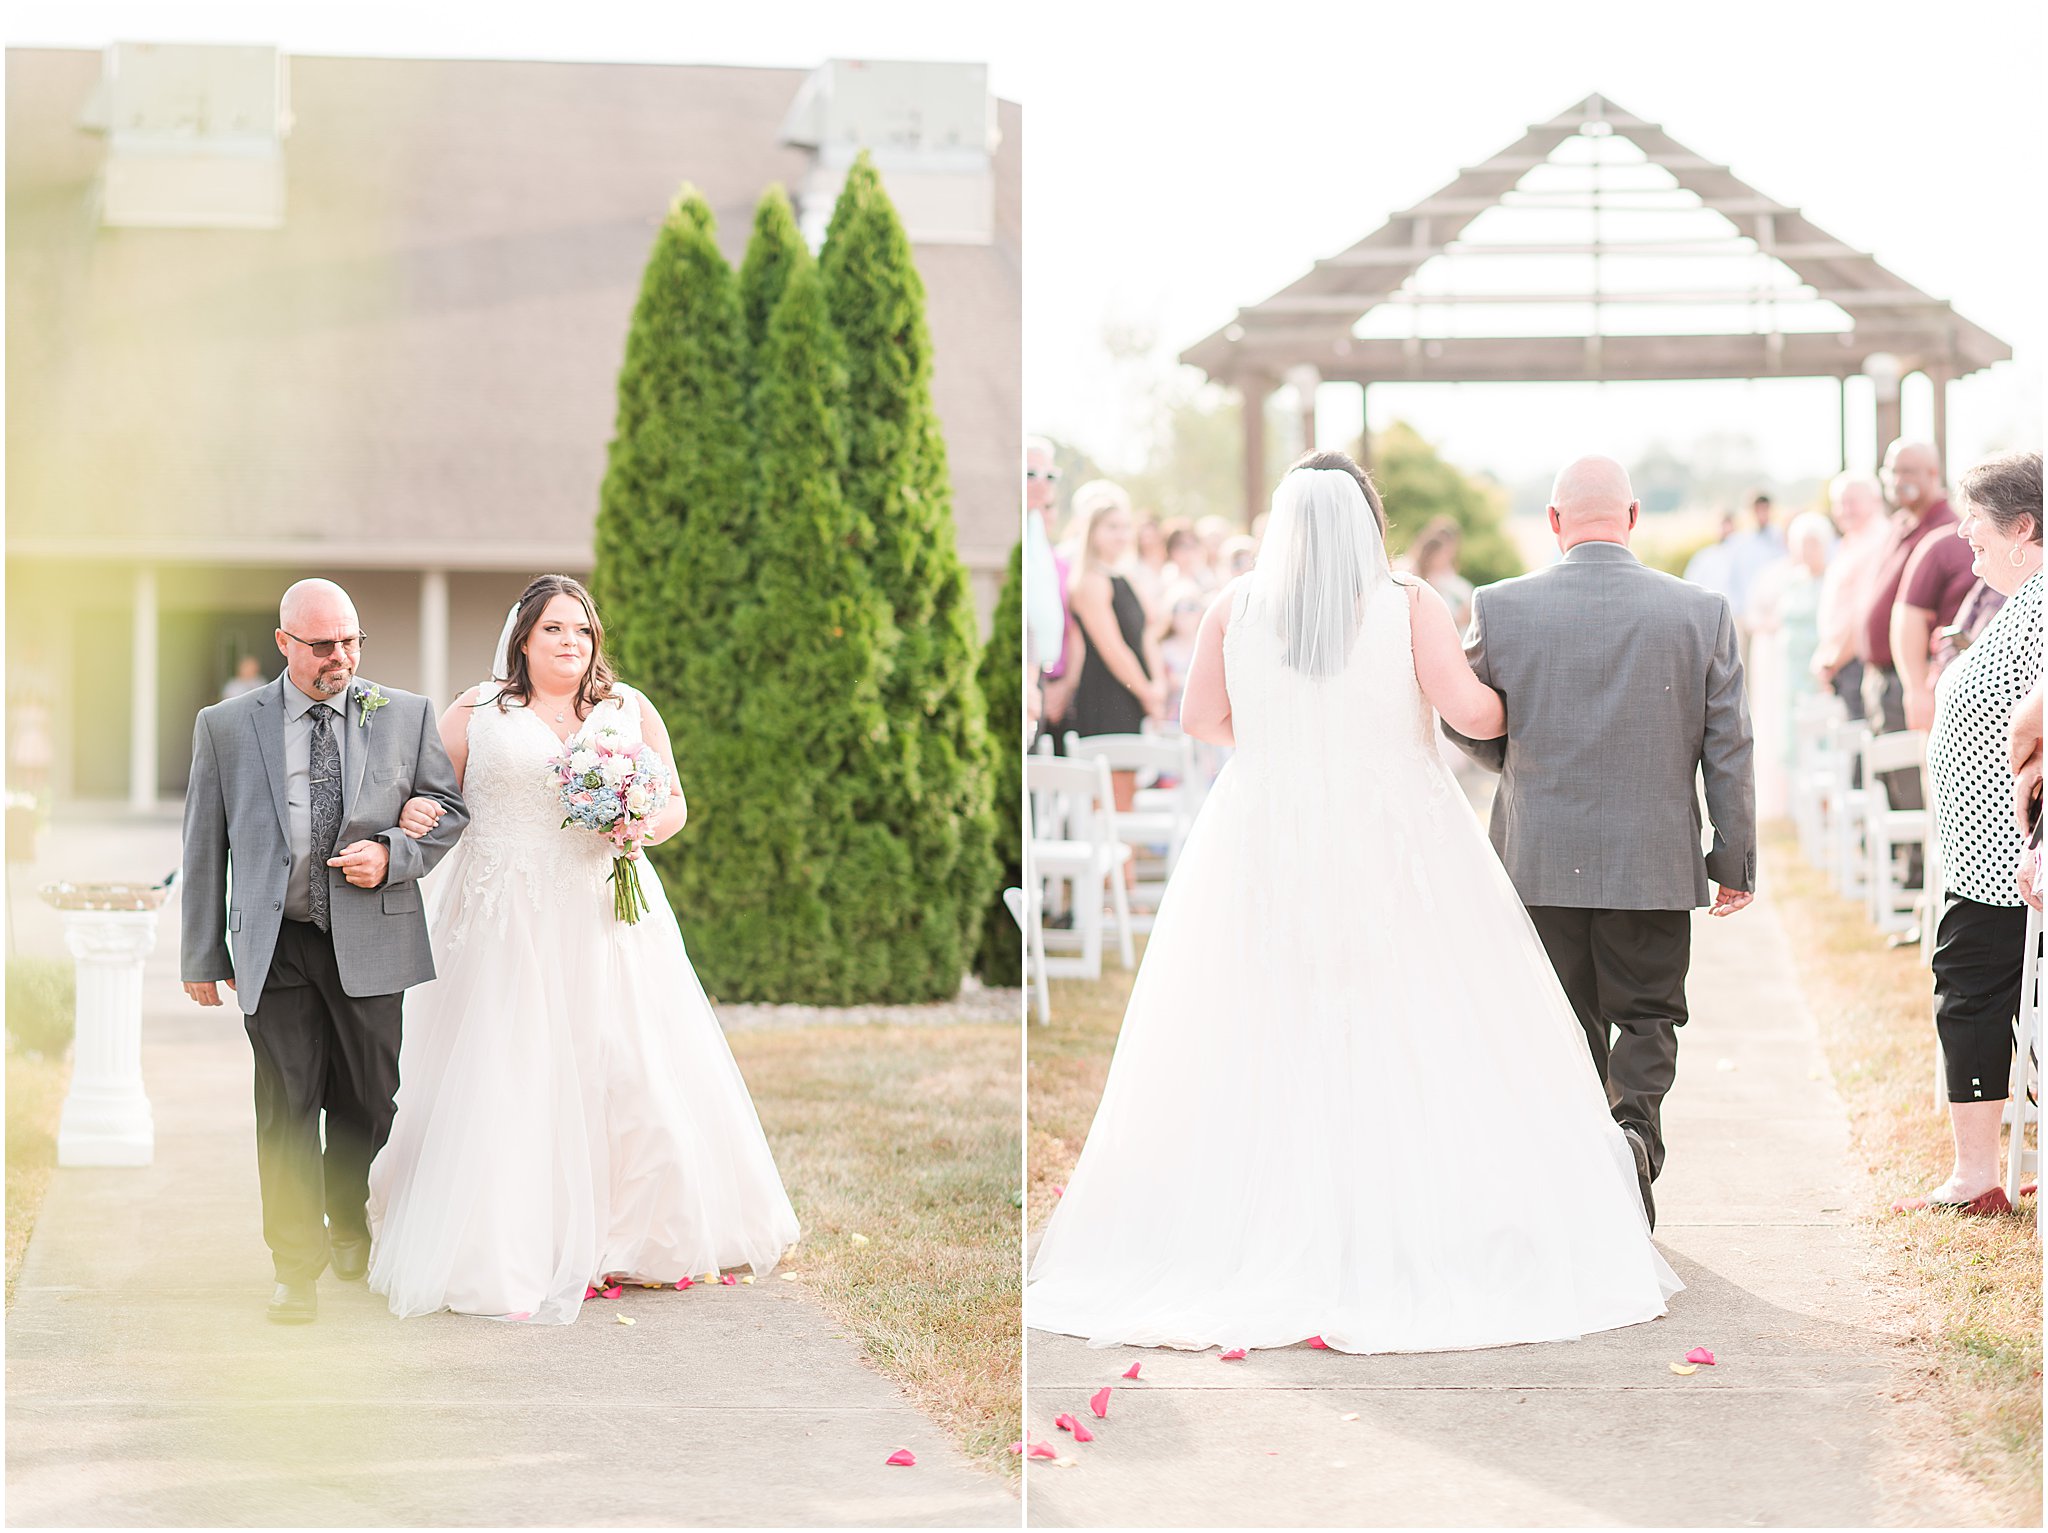 Bride walking down the aisle during outdoor ceremony at Cornerstone Hall in Salem, IN